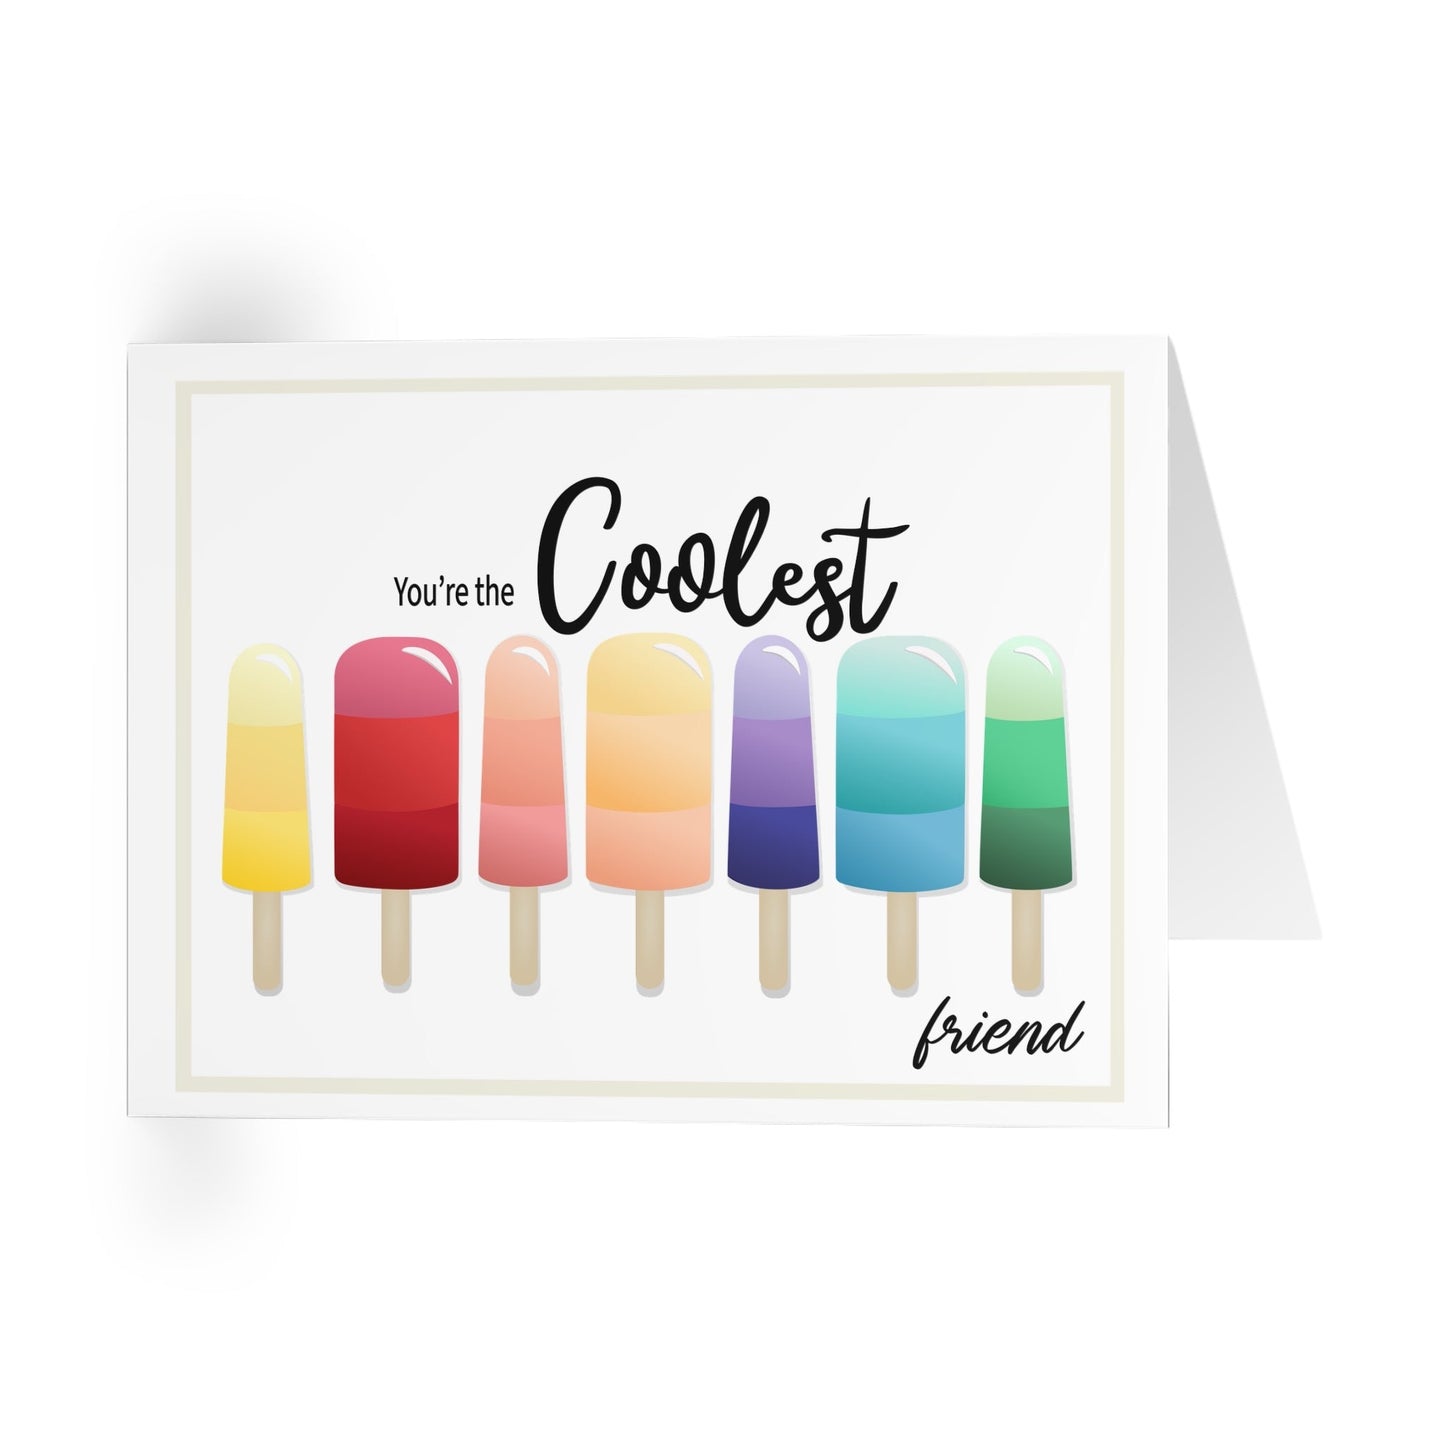 Greeting Cards (5 Pack)- Rainbow Popsicles, You’re the Coolest Friend